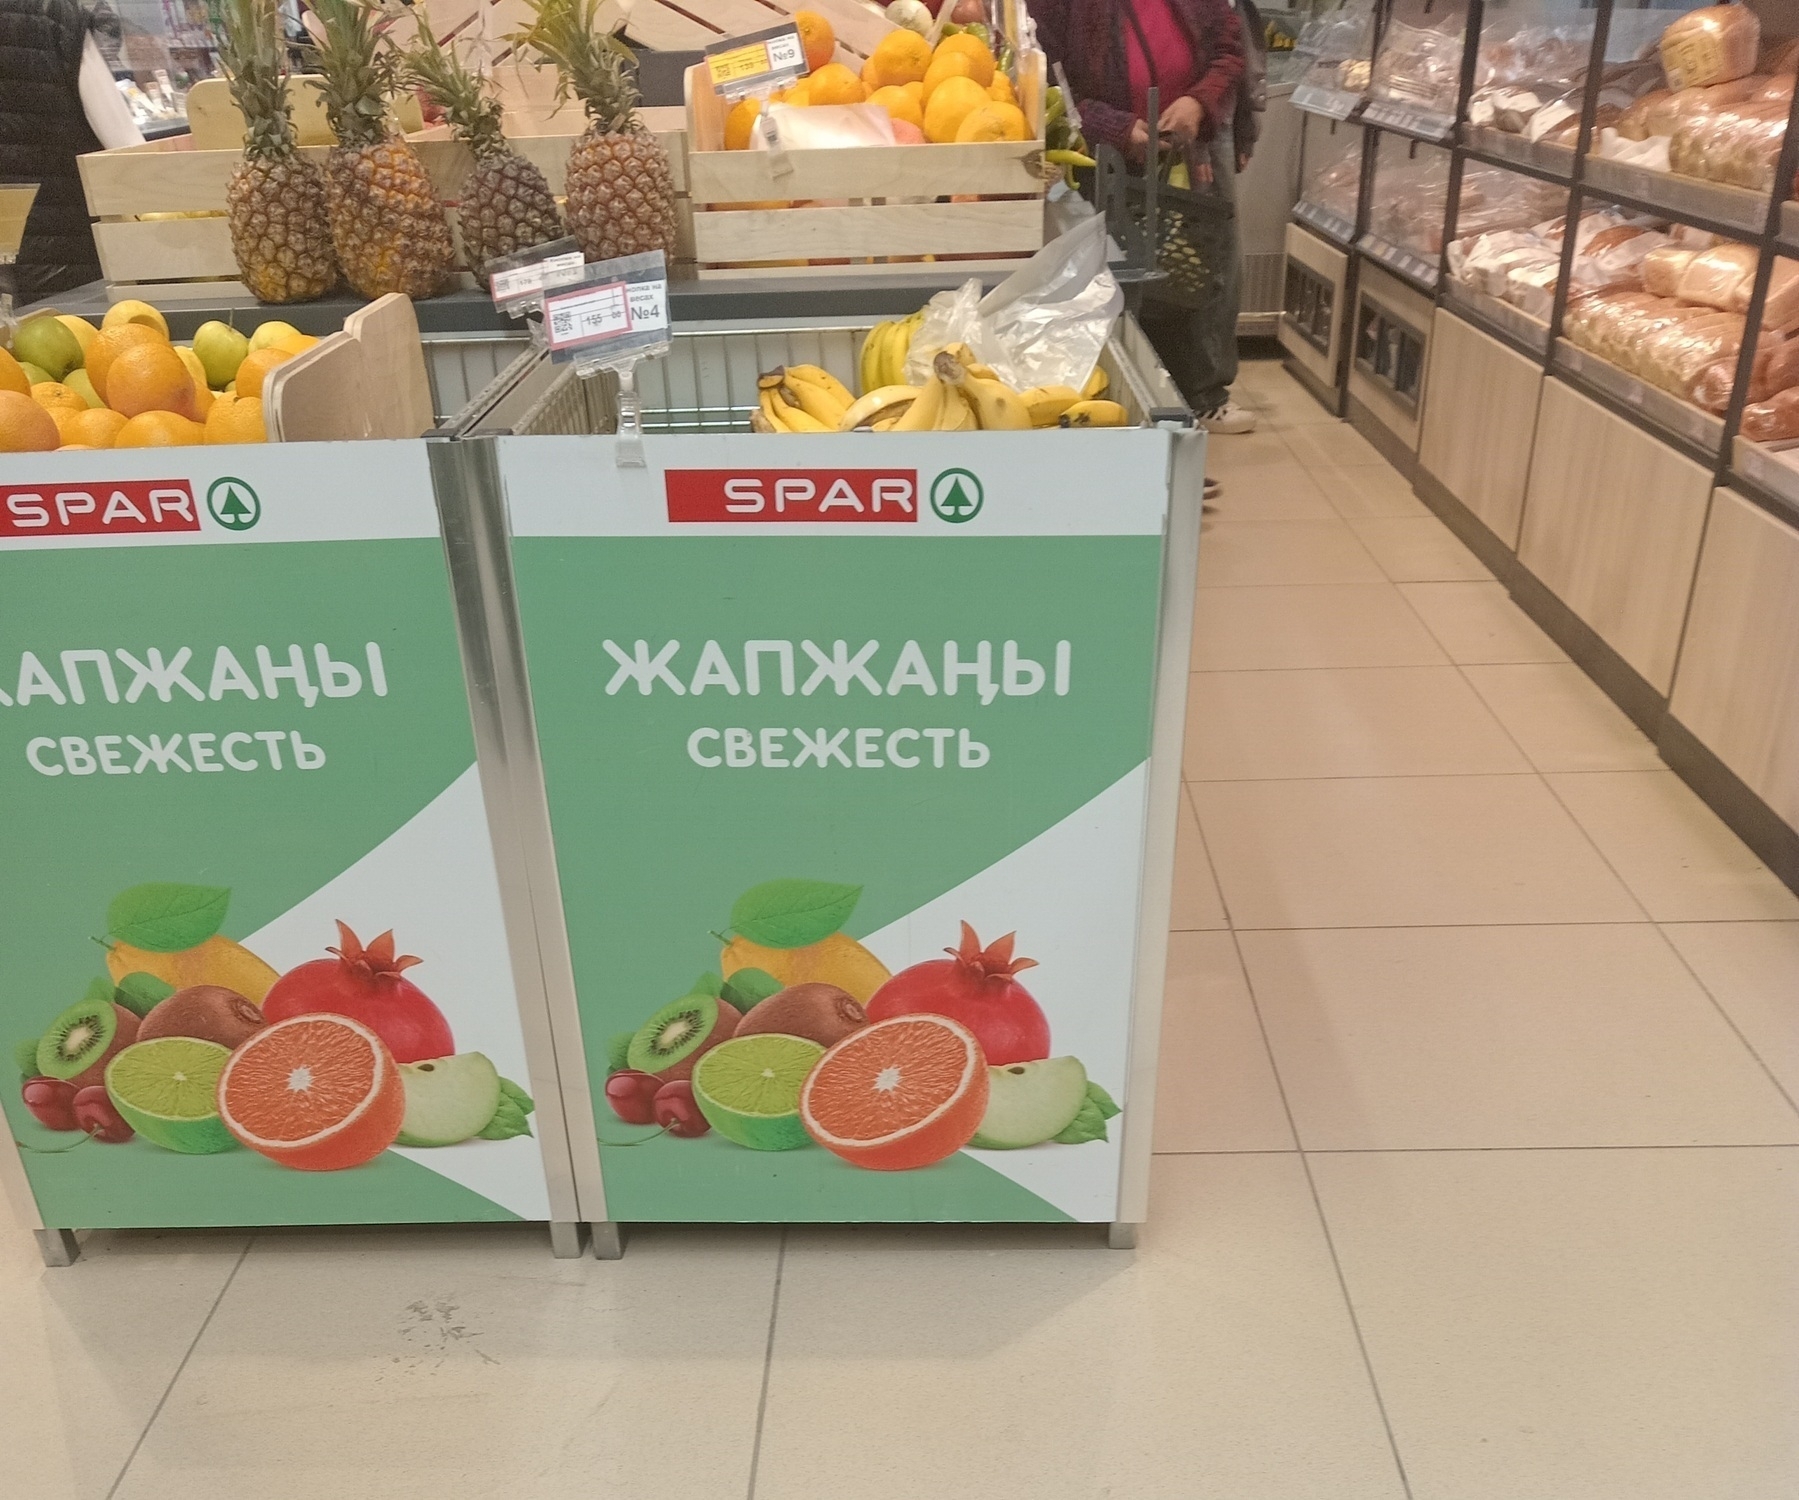 produce display rack sign which reads "super fresh" in Kyrgyz and "freshness" in Russian